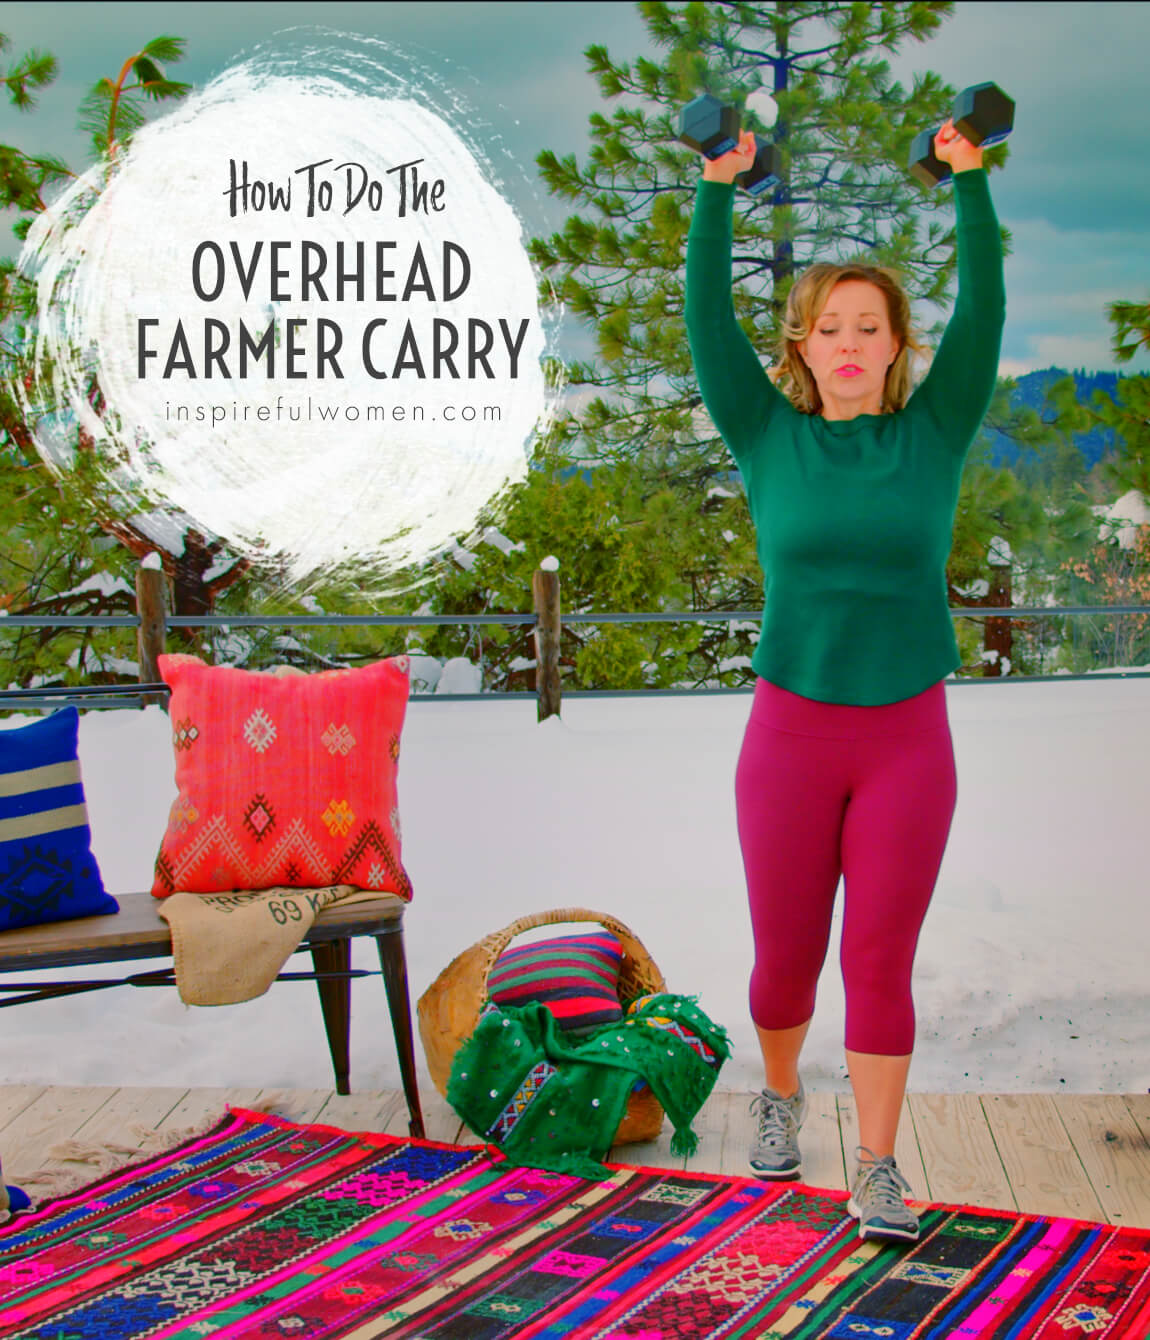 how-to-overhead-farmer-carry-mixed-grip-dumbbells-total-body-core-exercise-proper-form